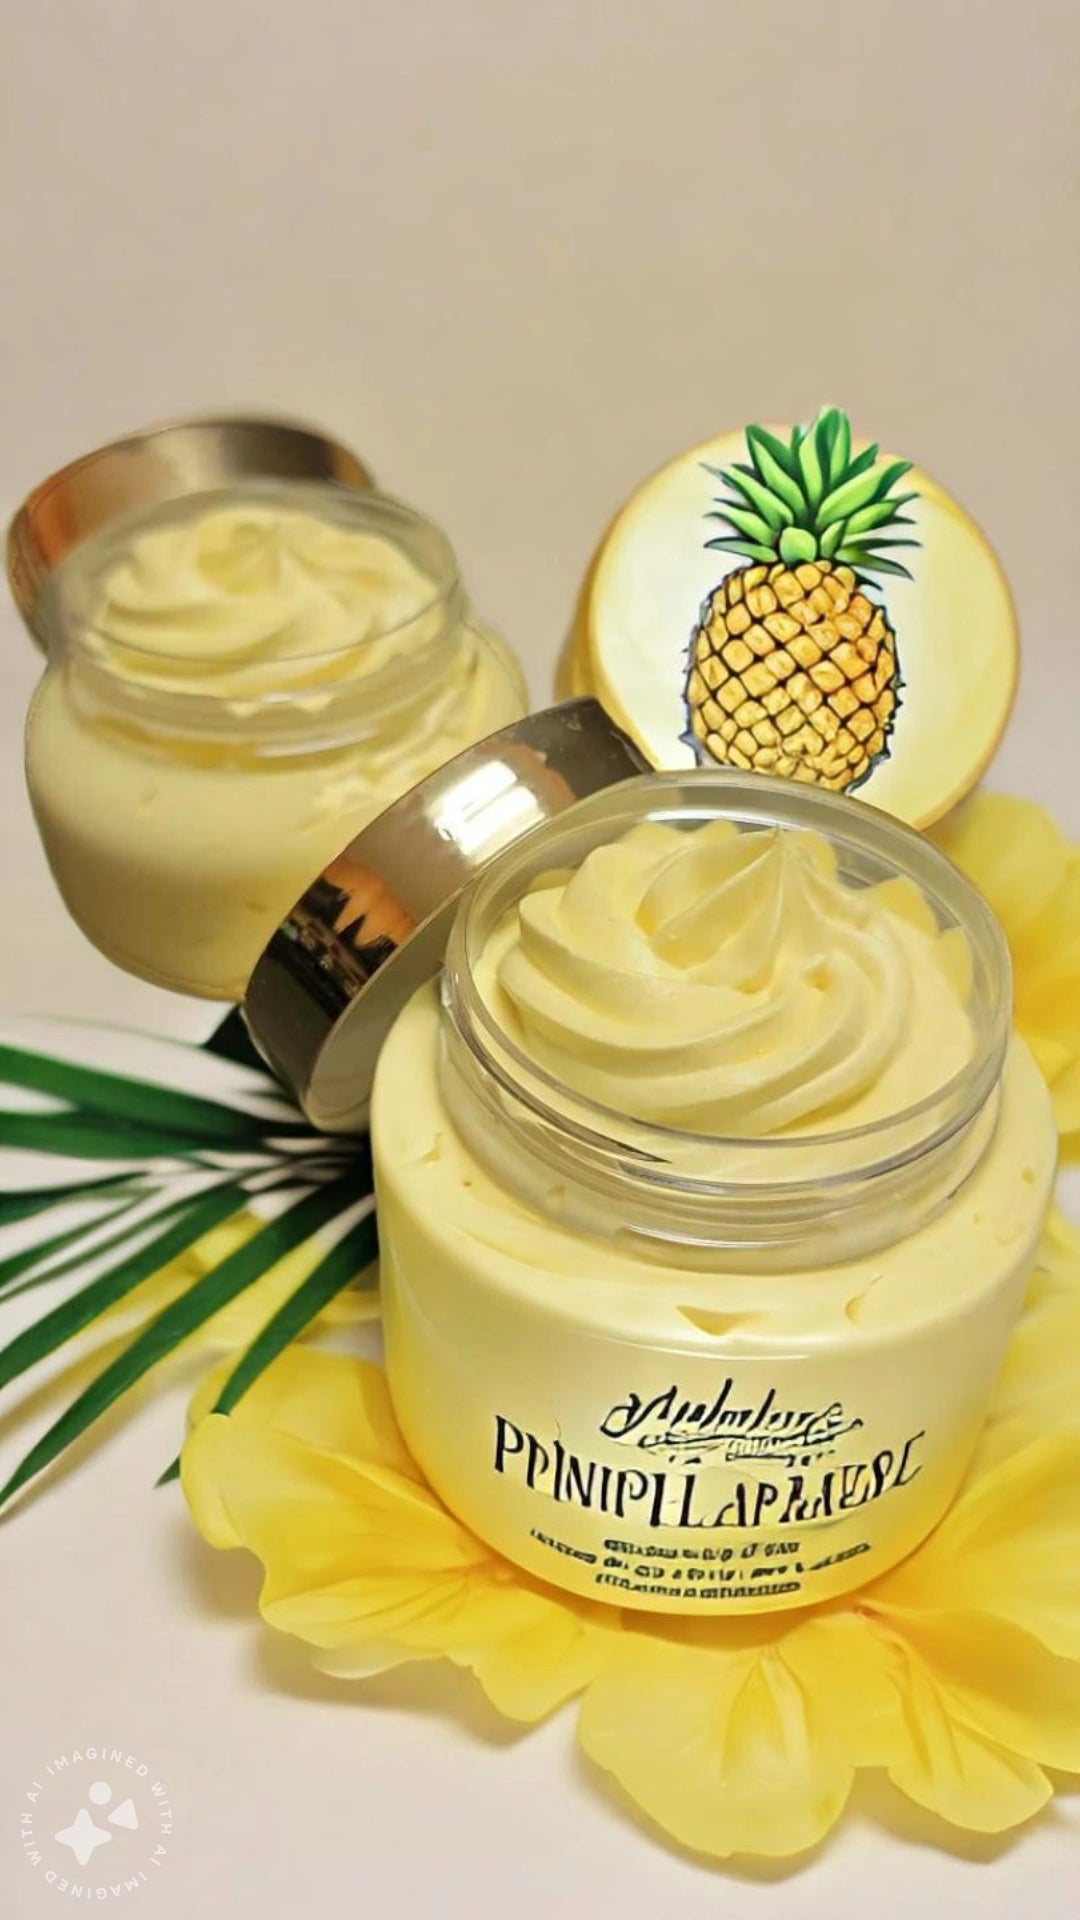 Pineapple Paradise Whipped Body Butter!!! 🍍